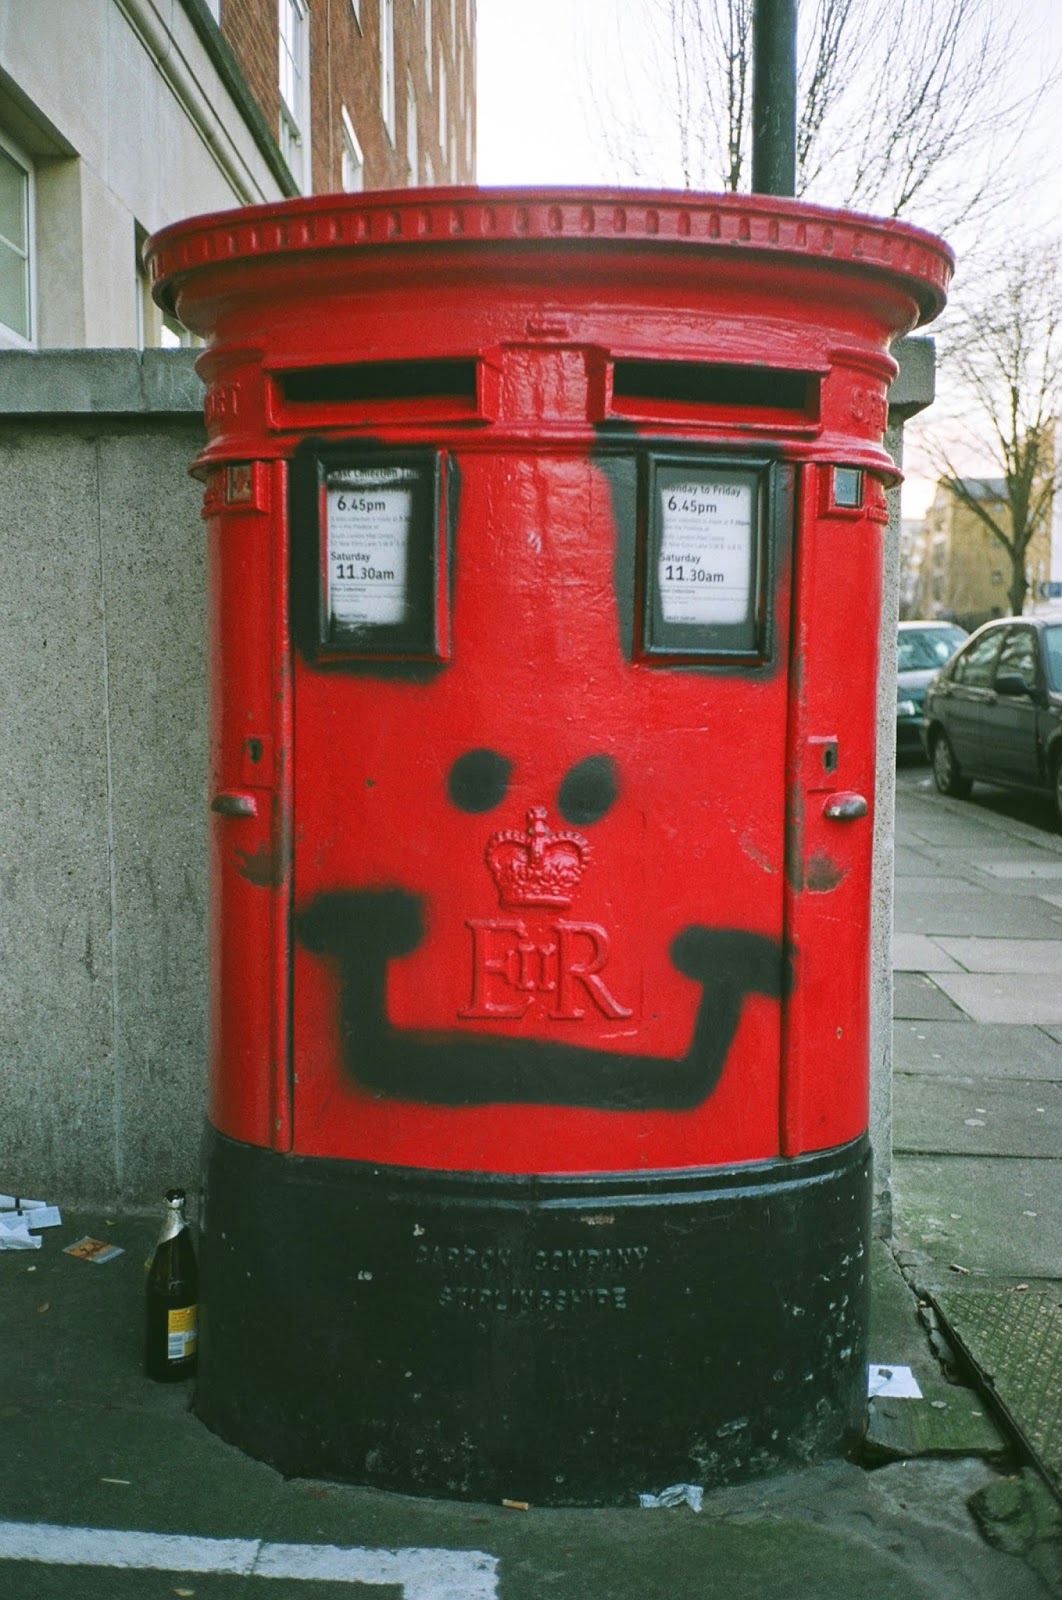 ROYAL MAIL, PRIVATISATION, POST BOXES, GPO, POSTAL DELIVERY, GRAFITTI, PIMLICO, LONDON, DOLPHIN SQUARE, © VAC 100 DAYS 4 MILLION CONVERSATIONS, 2015 GENERAL ELECTION